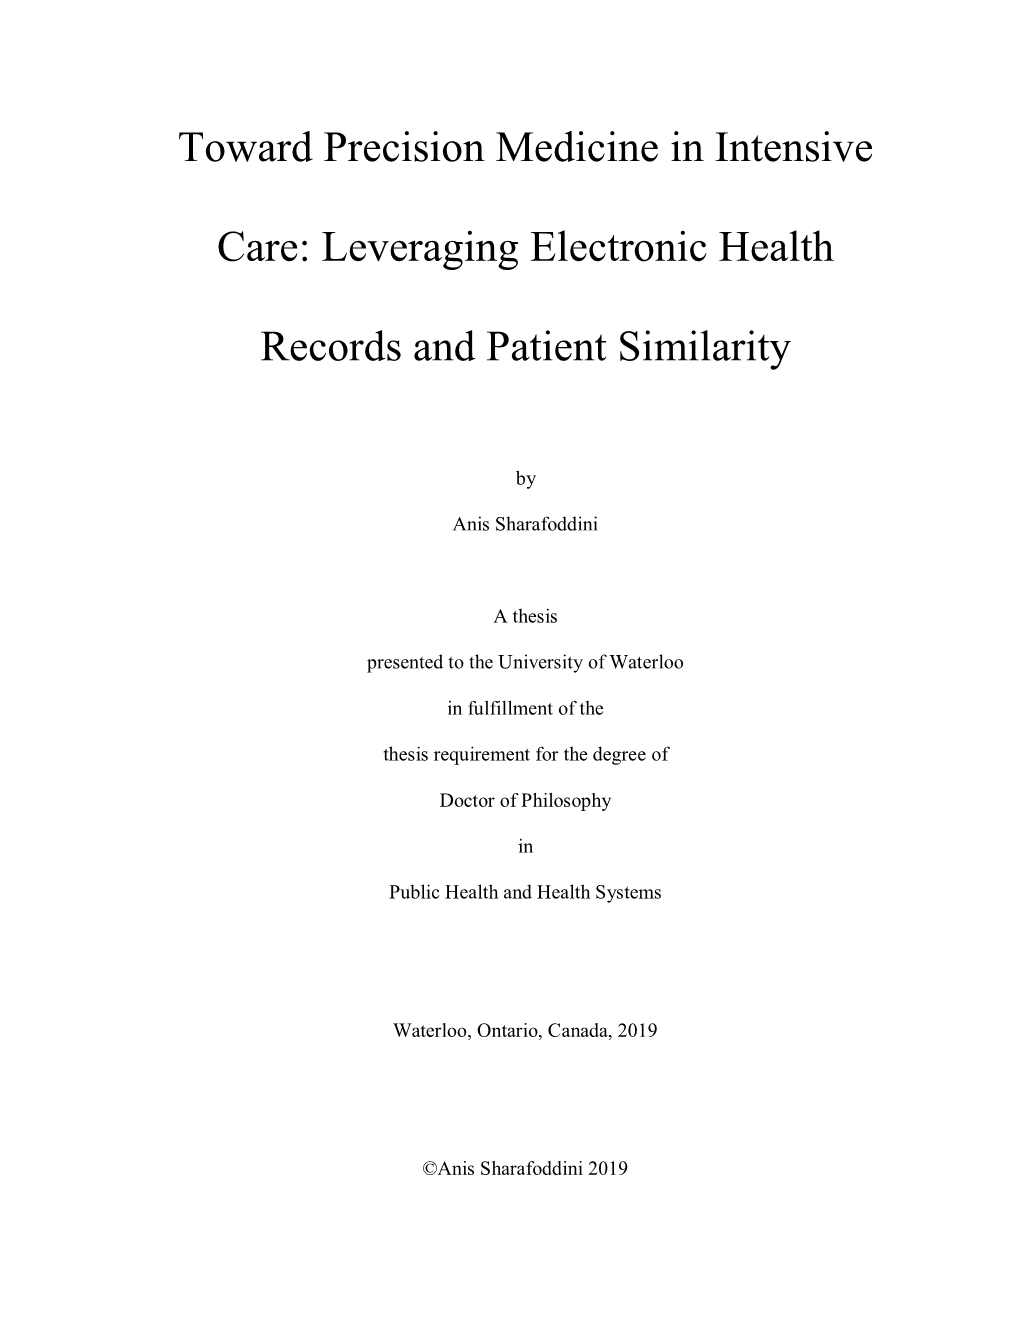 Leveraging Electronic Health Records and Patient Similarity